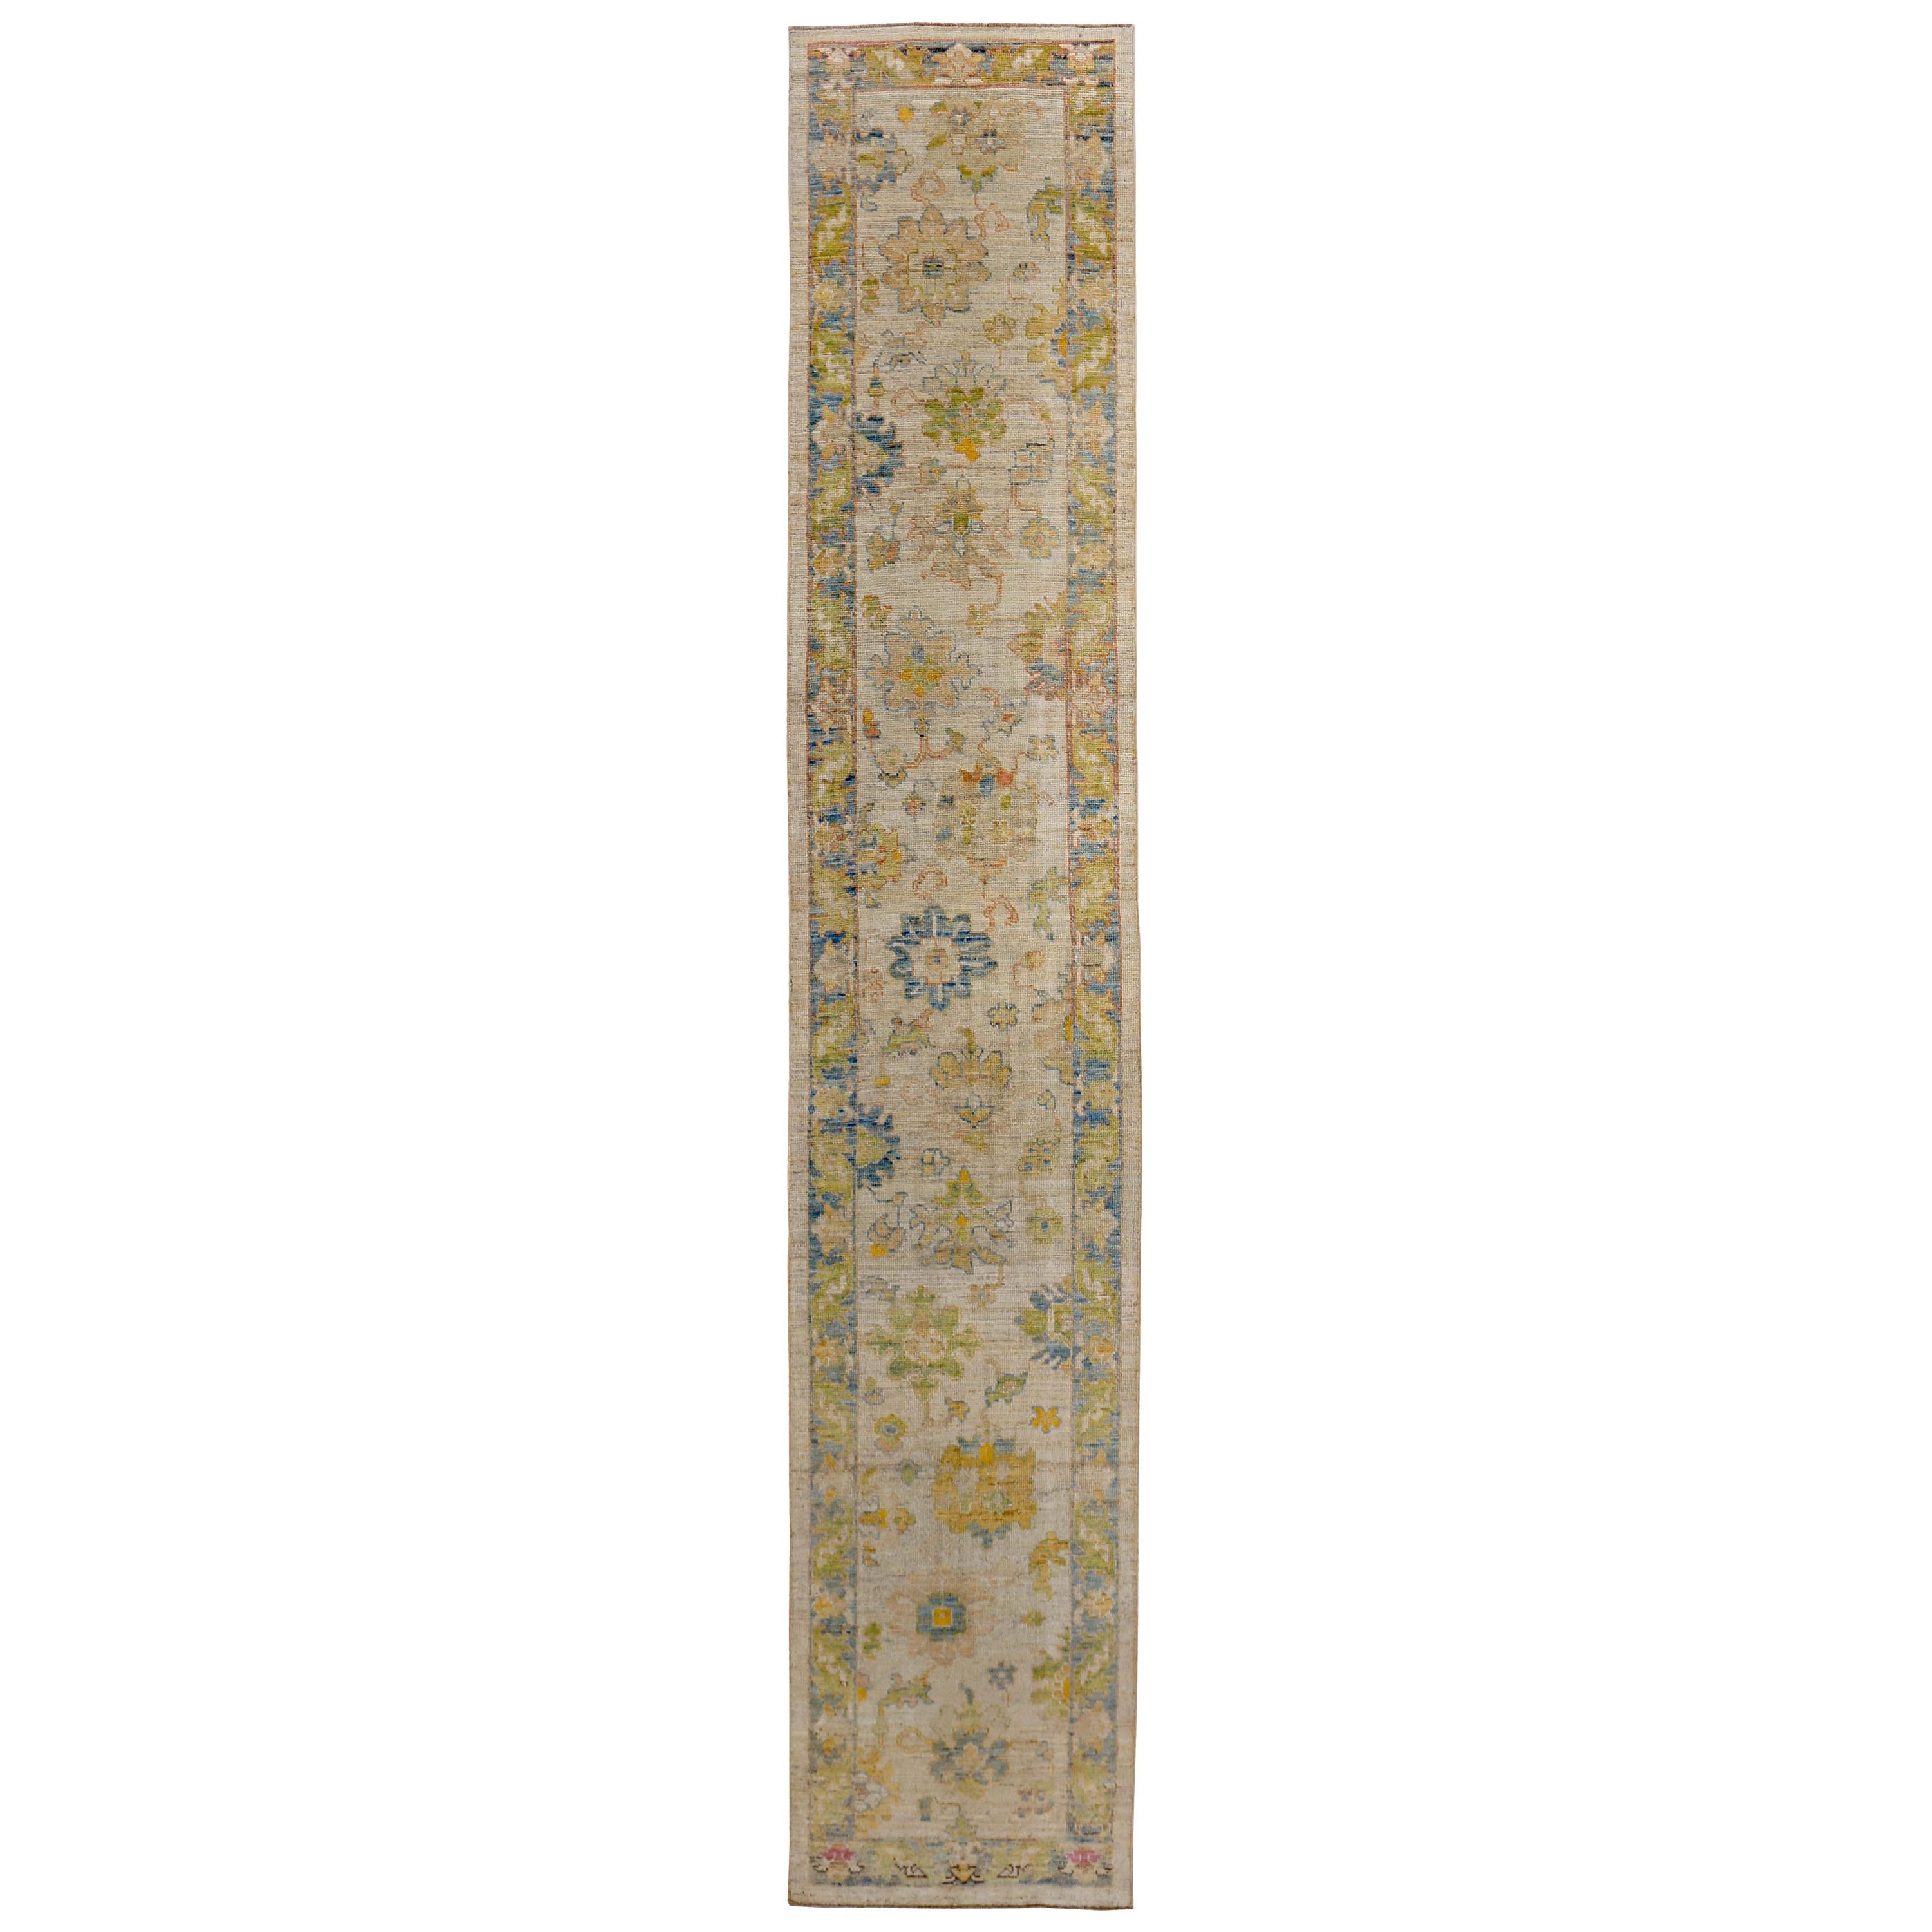 Turkish Oushak Runner Rug with Blue and Green Floral Patterns on Ivory Field